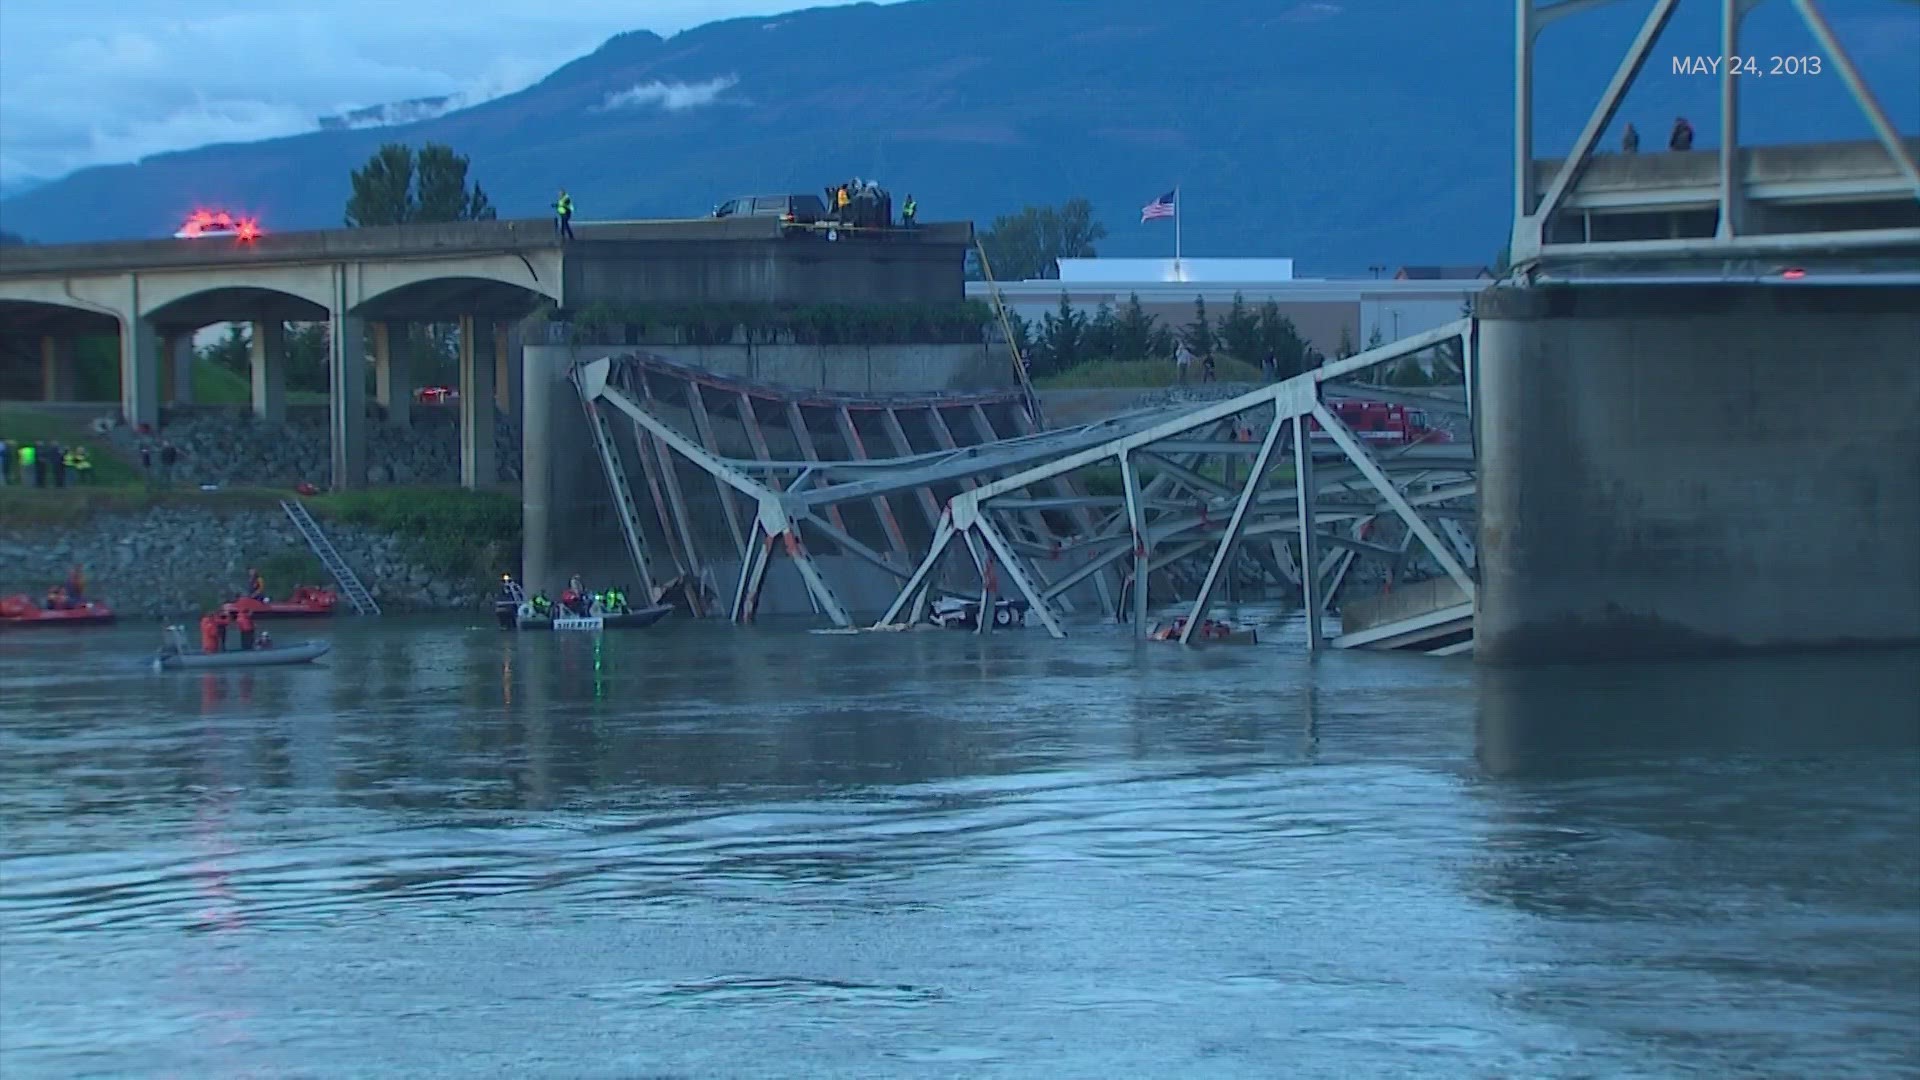 It's been 10 years since the Interstate 5 bridge over the Skagit River collapsed, plunging three people and two vehicles into the water below.